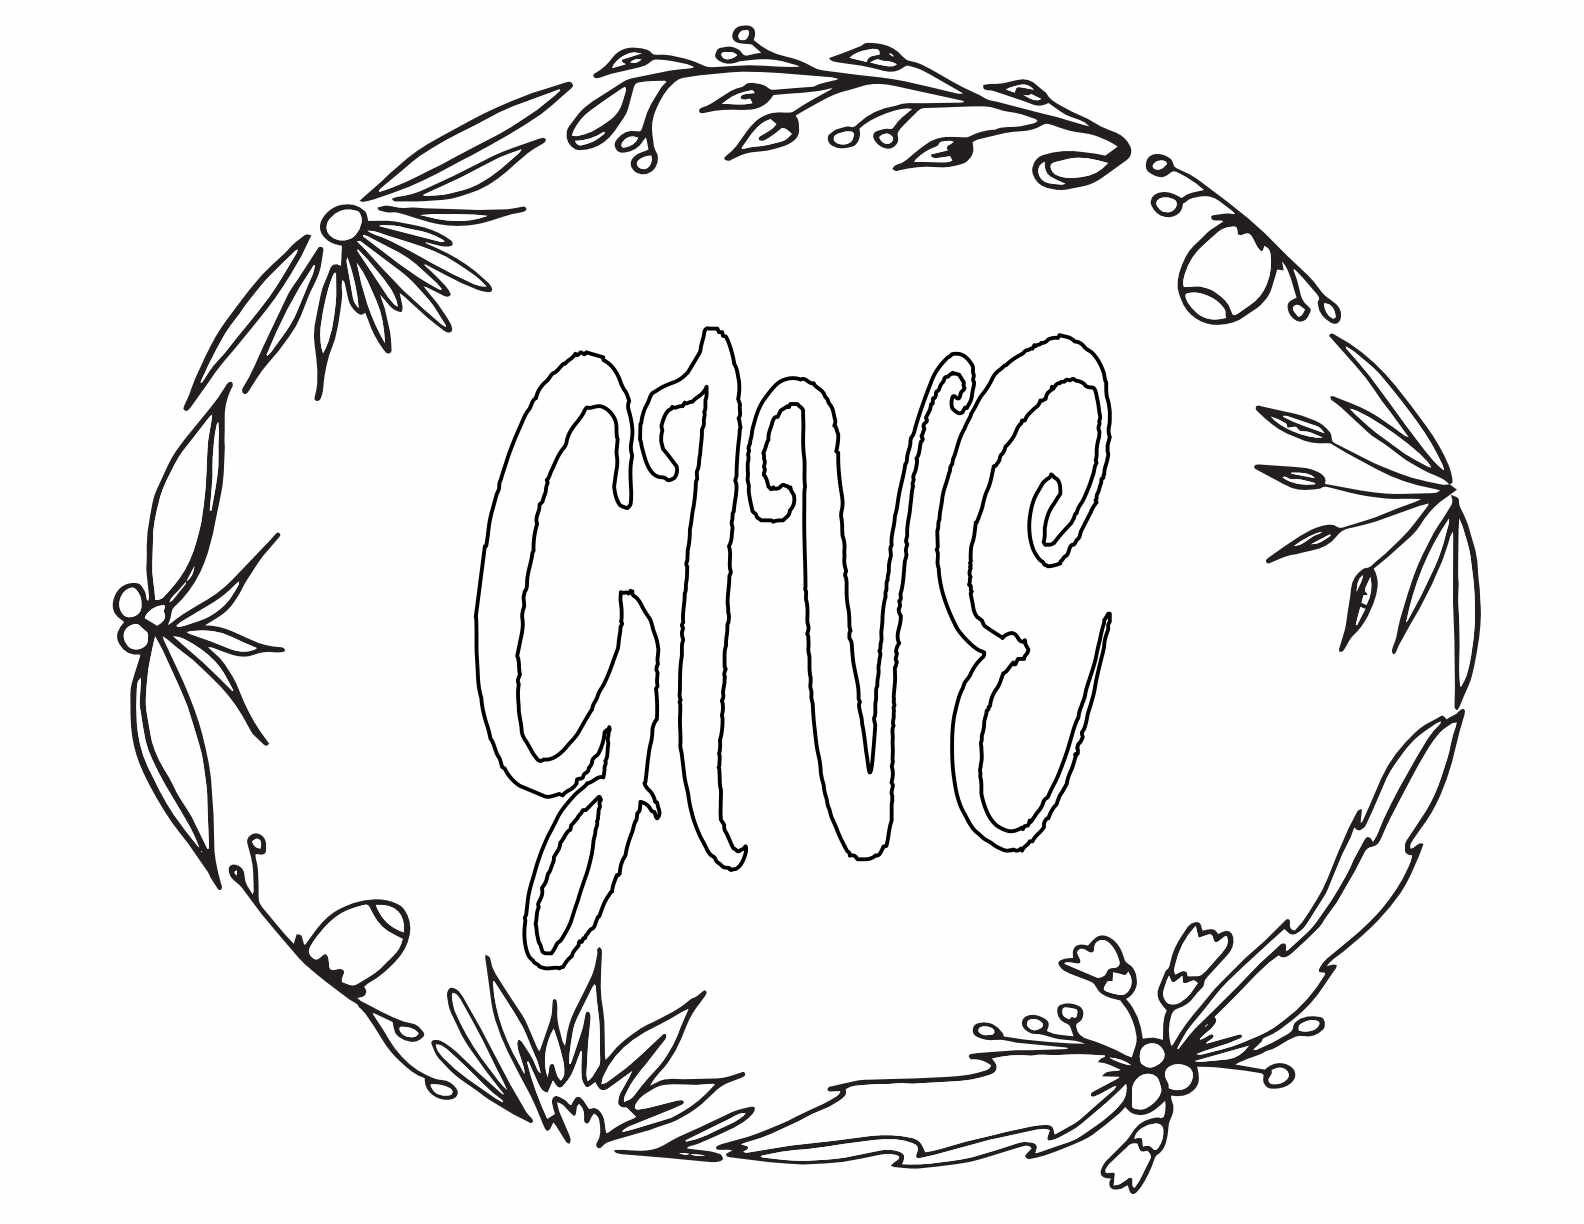 3 Free GIVE Printable Coloring Page CLICK HERE TO DOWNLOAD THE PAGE ABOVE